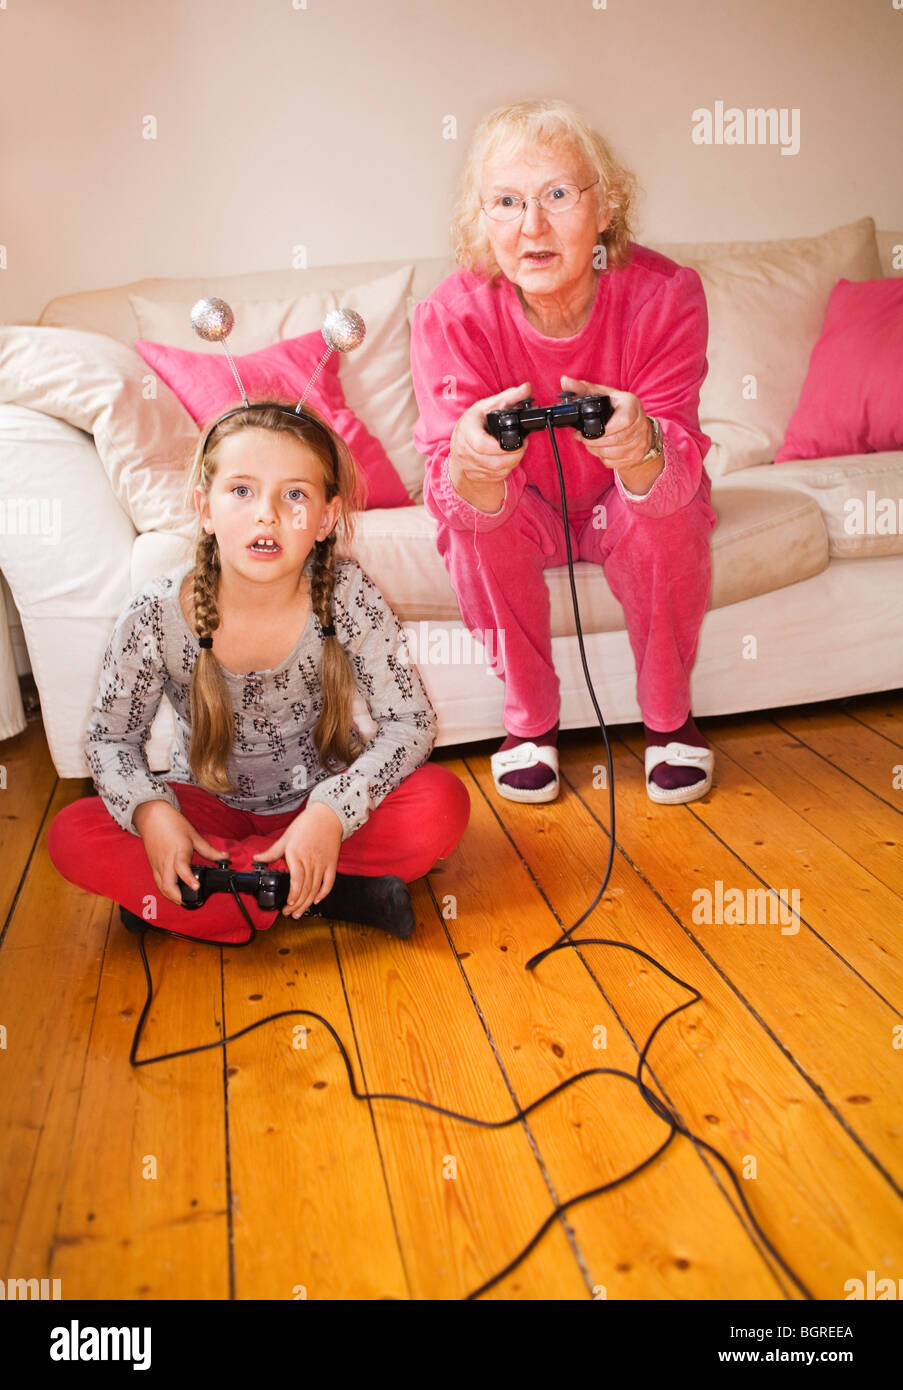 An elderly woman playing video game with her granddaughter, Sweden. Stock Photo